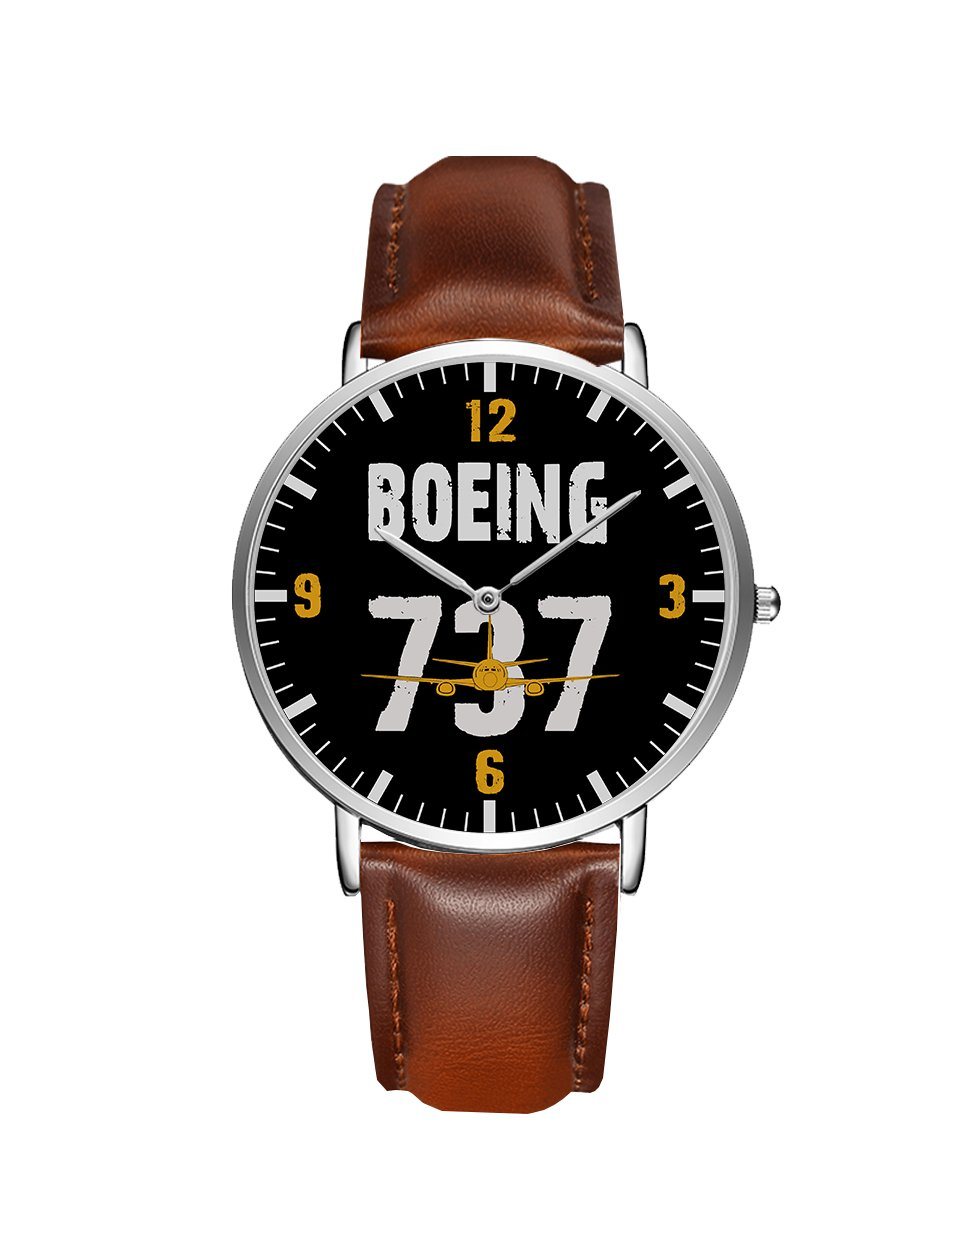 Boeing 737 Designed Leather Strap Watches Pilot Eyes Store Silver & Brown Leather Strap 